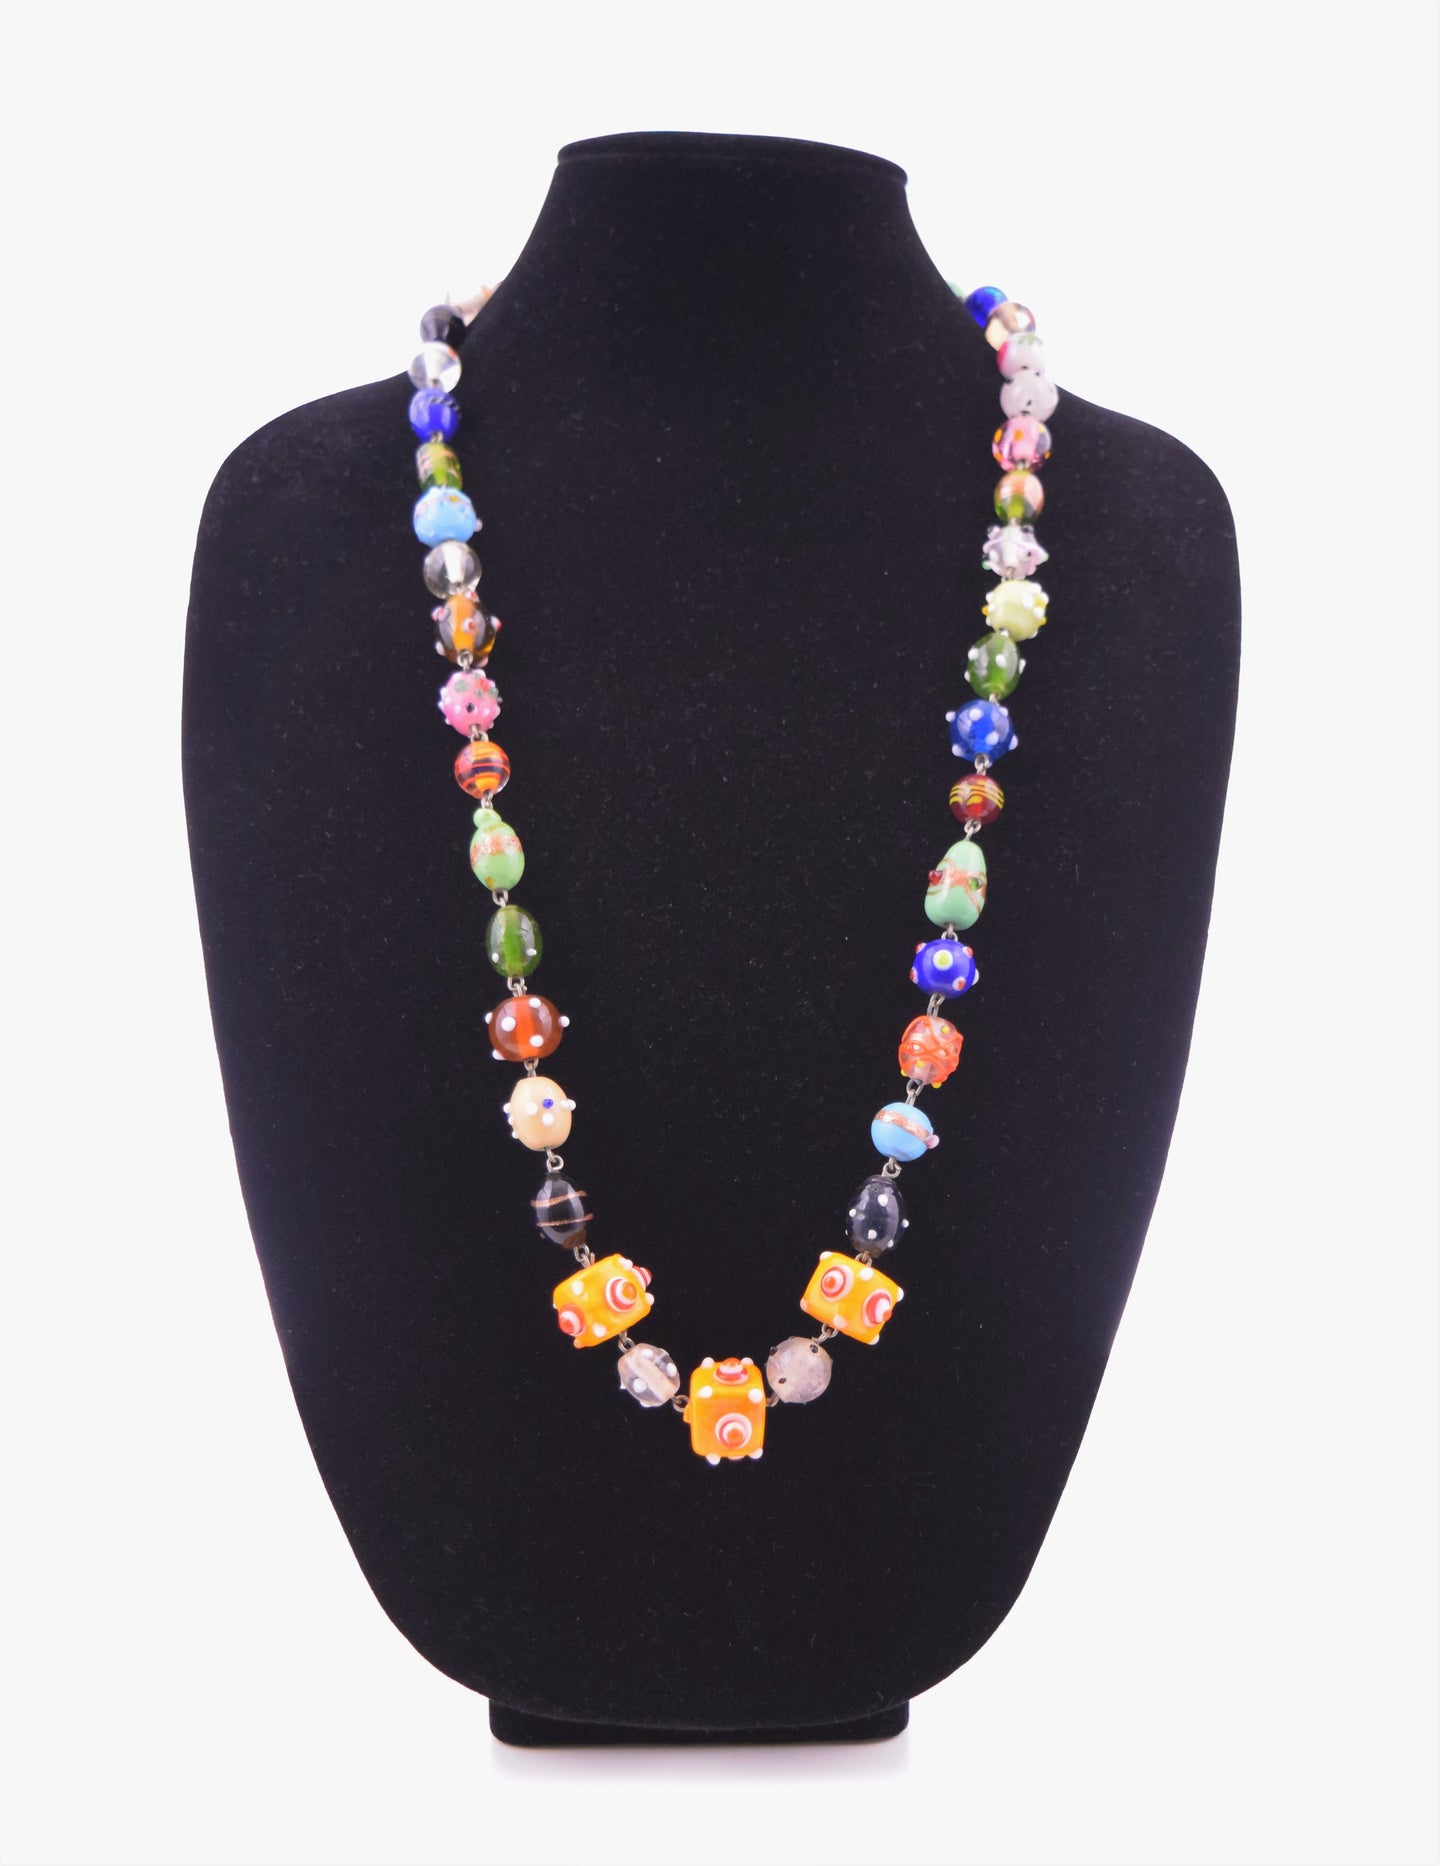 Vintage Murano Glass Beads Necklace